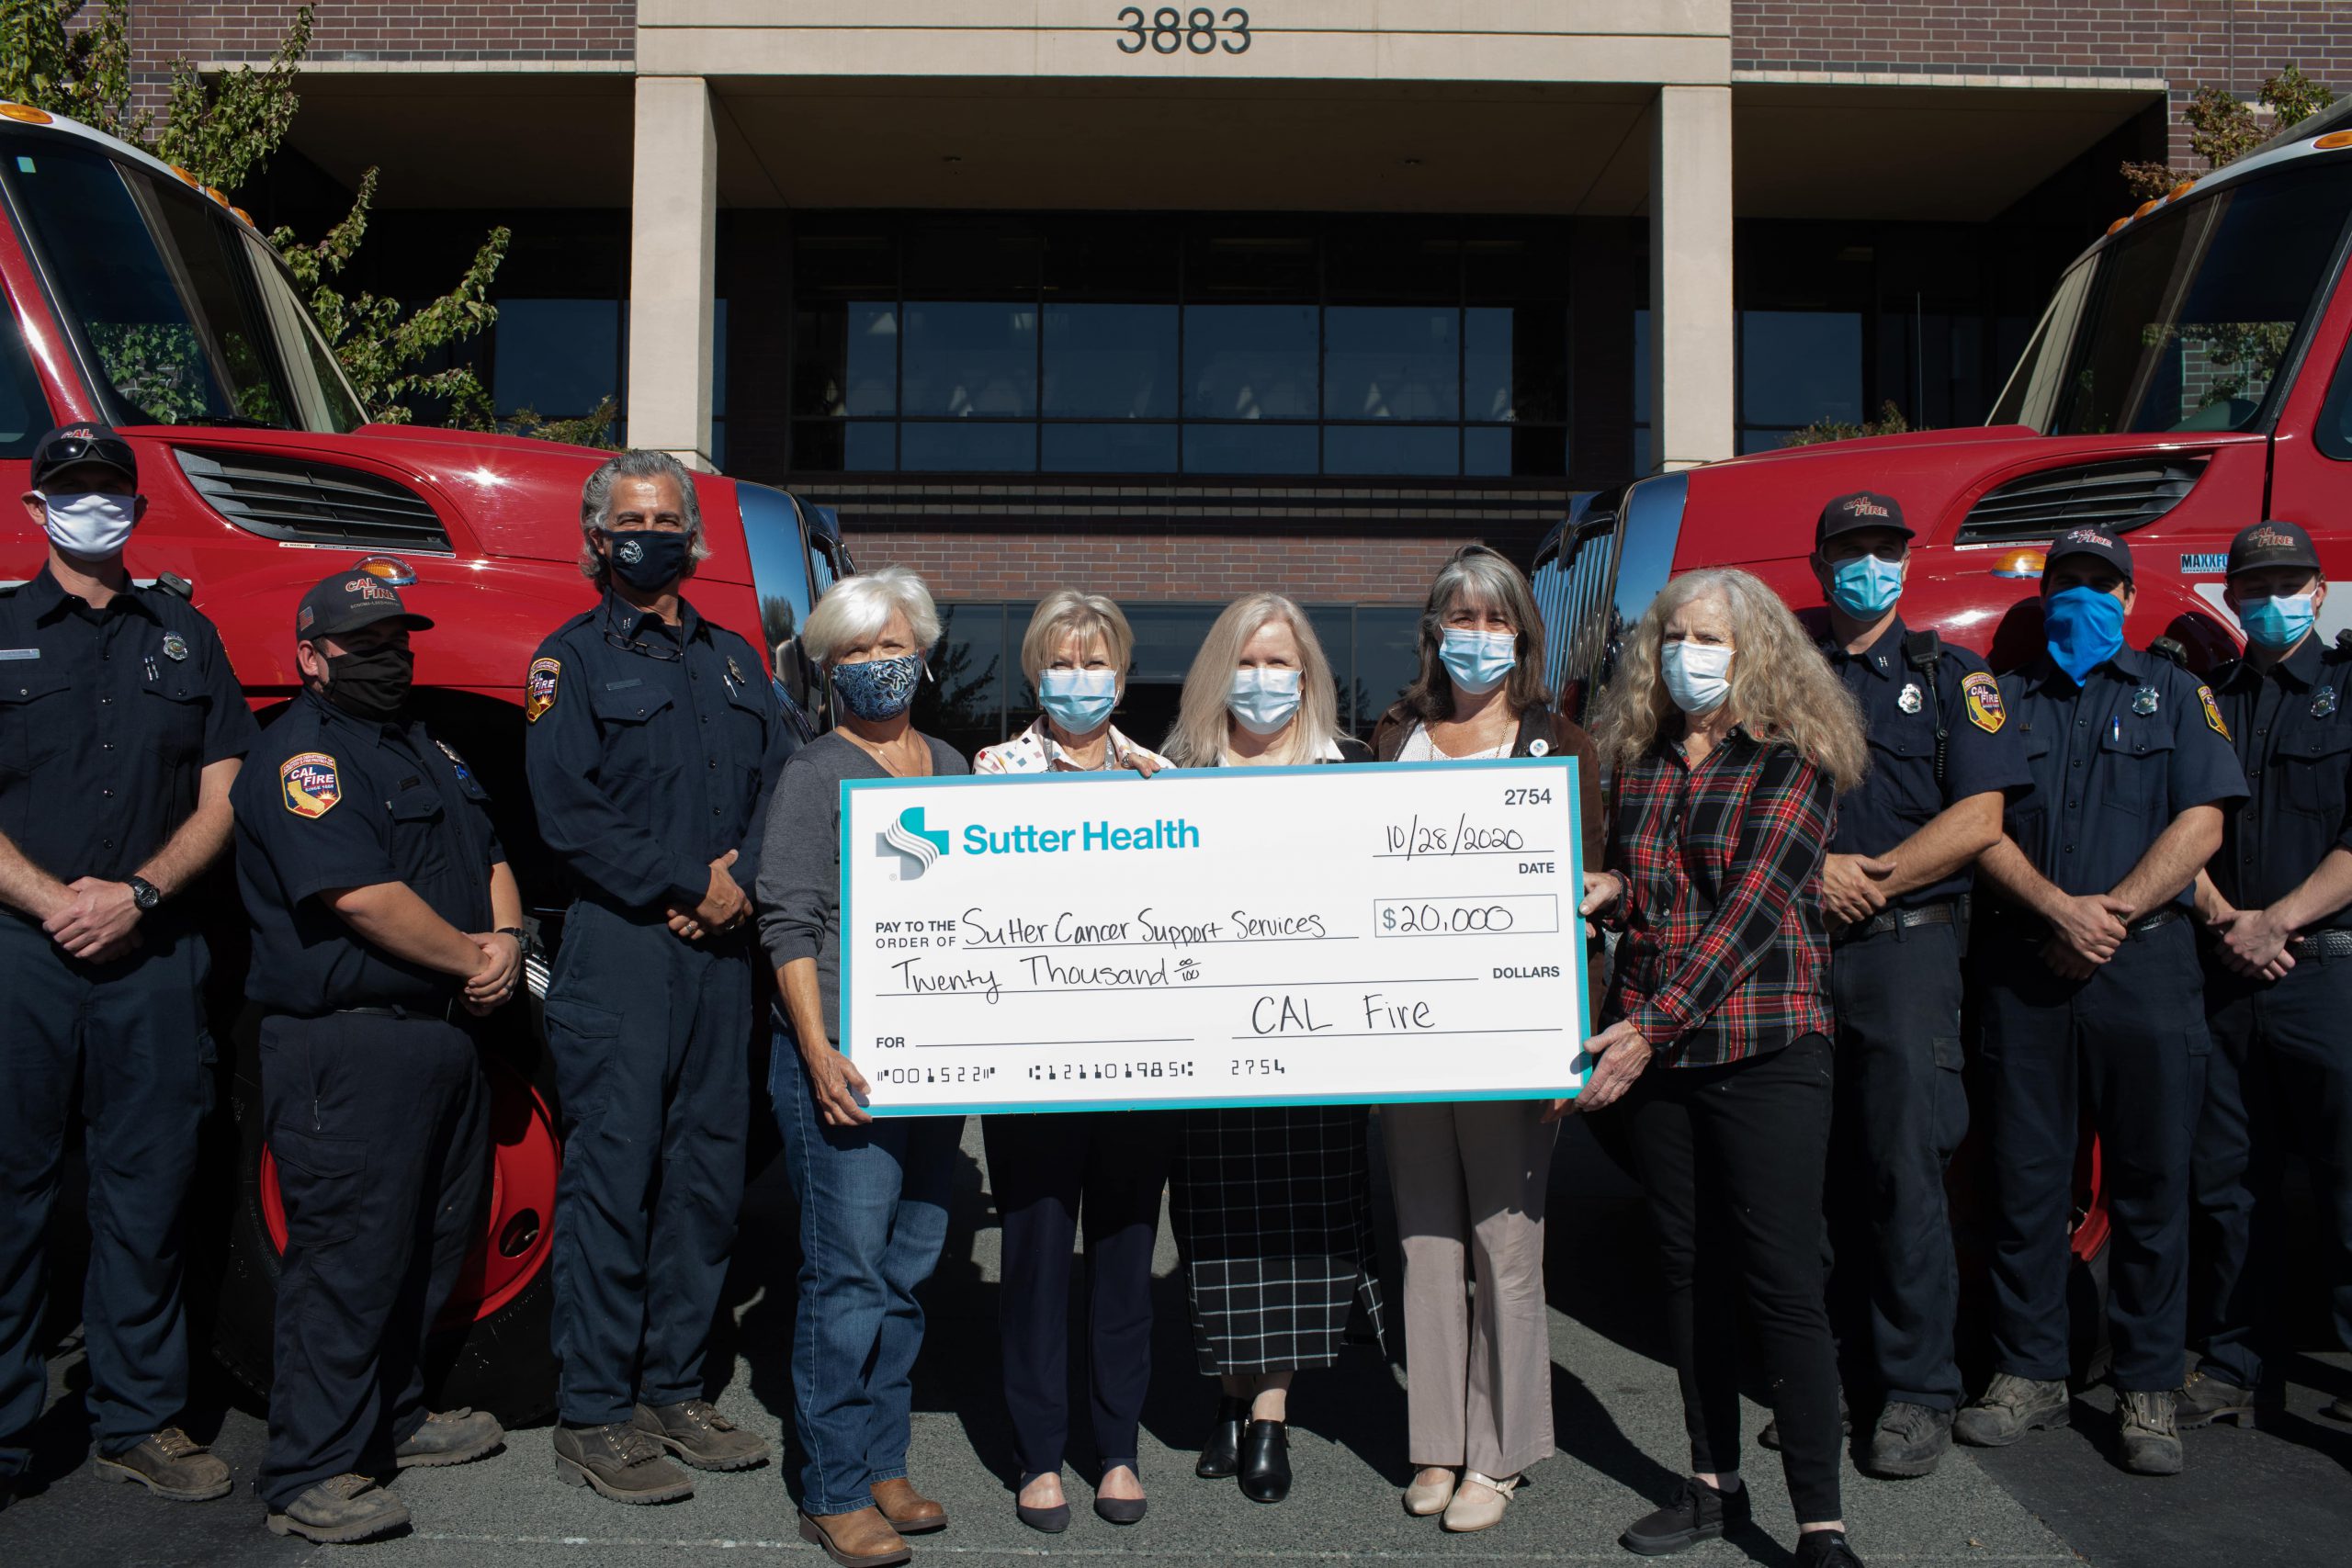 CalFire and Sutter Support Services pose together with $20,000 check